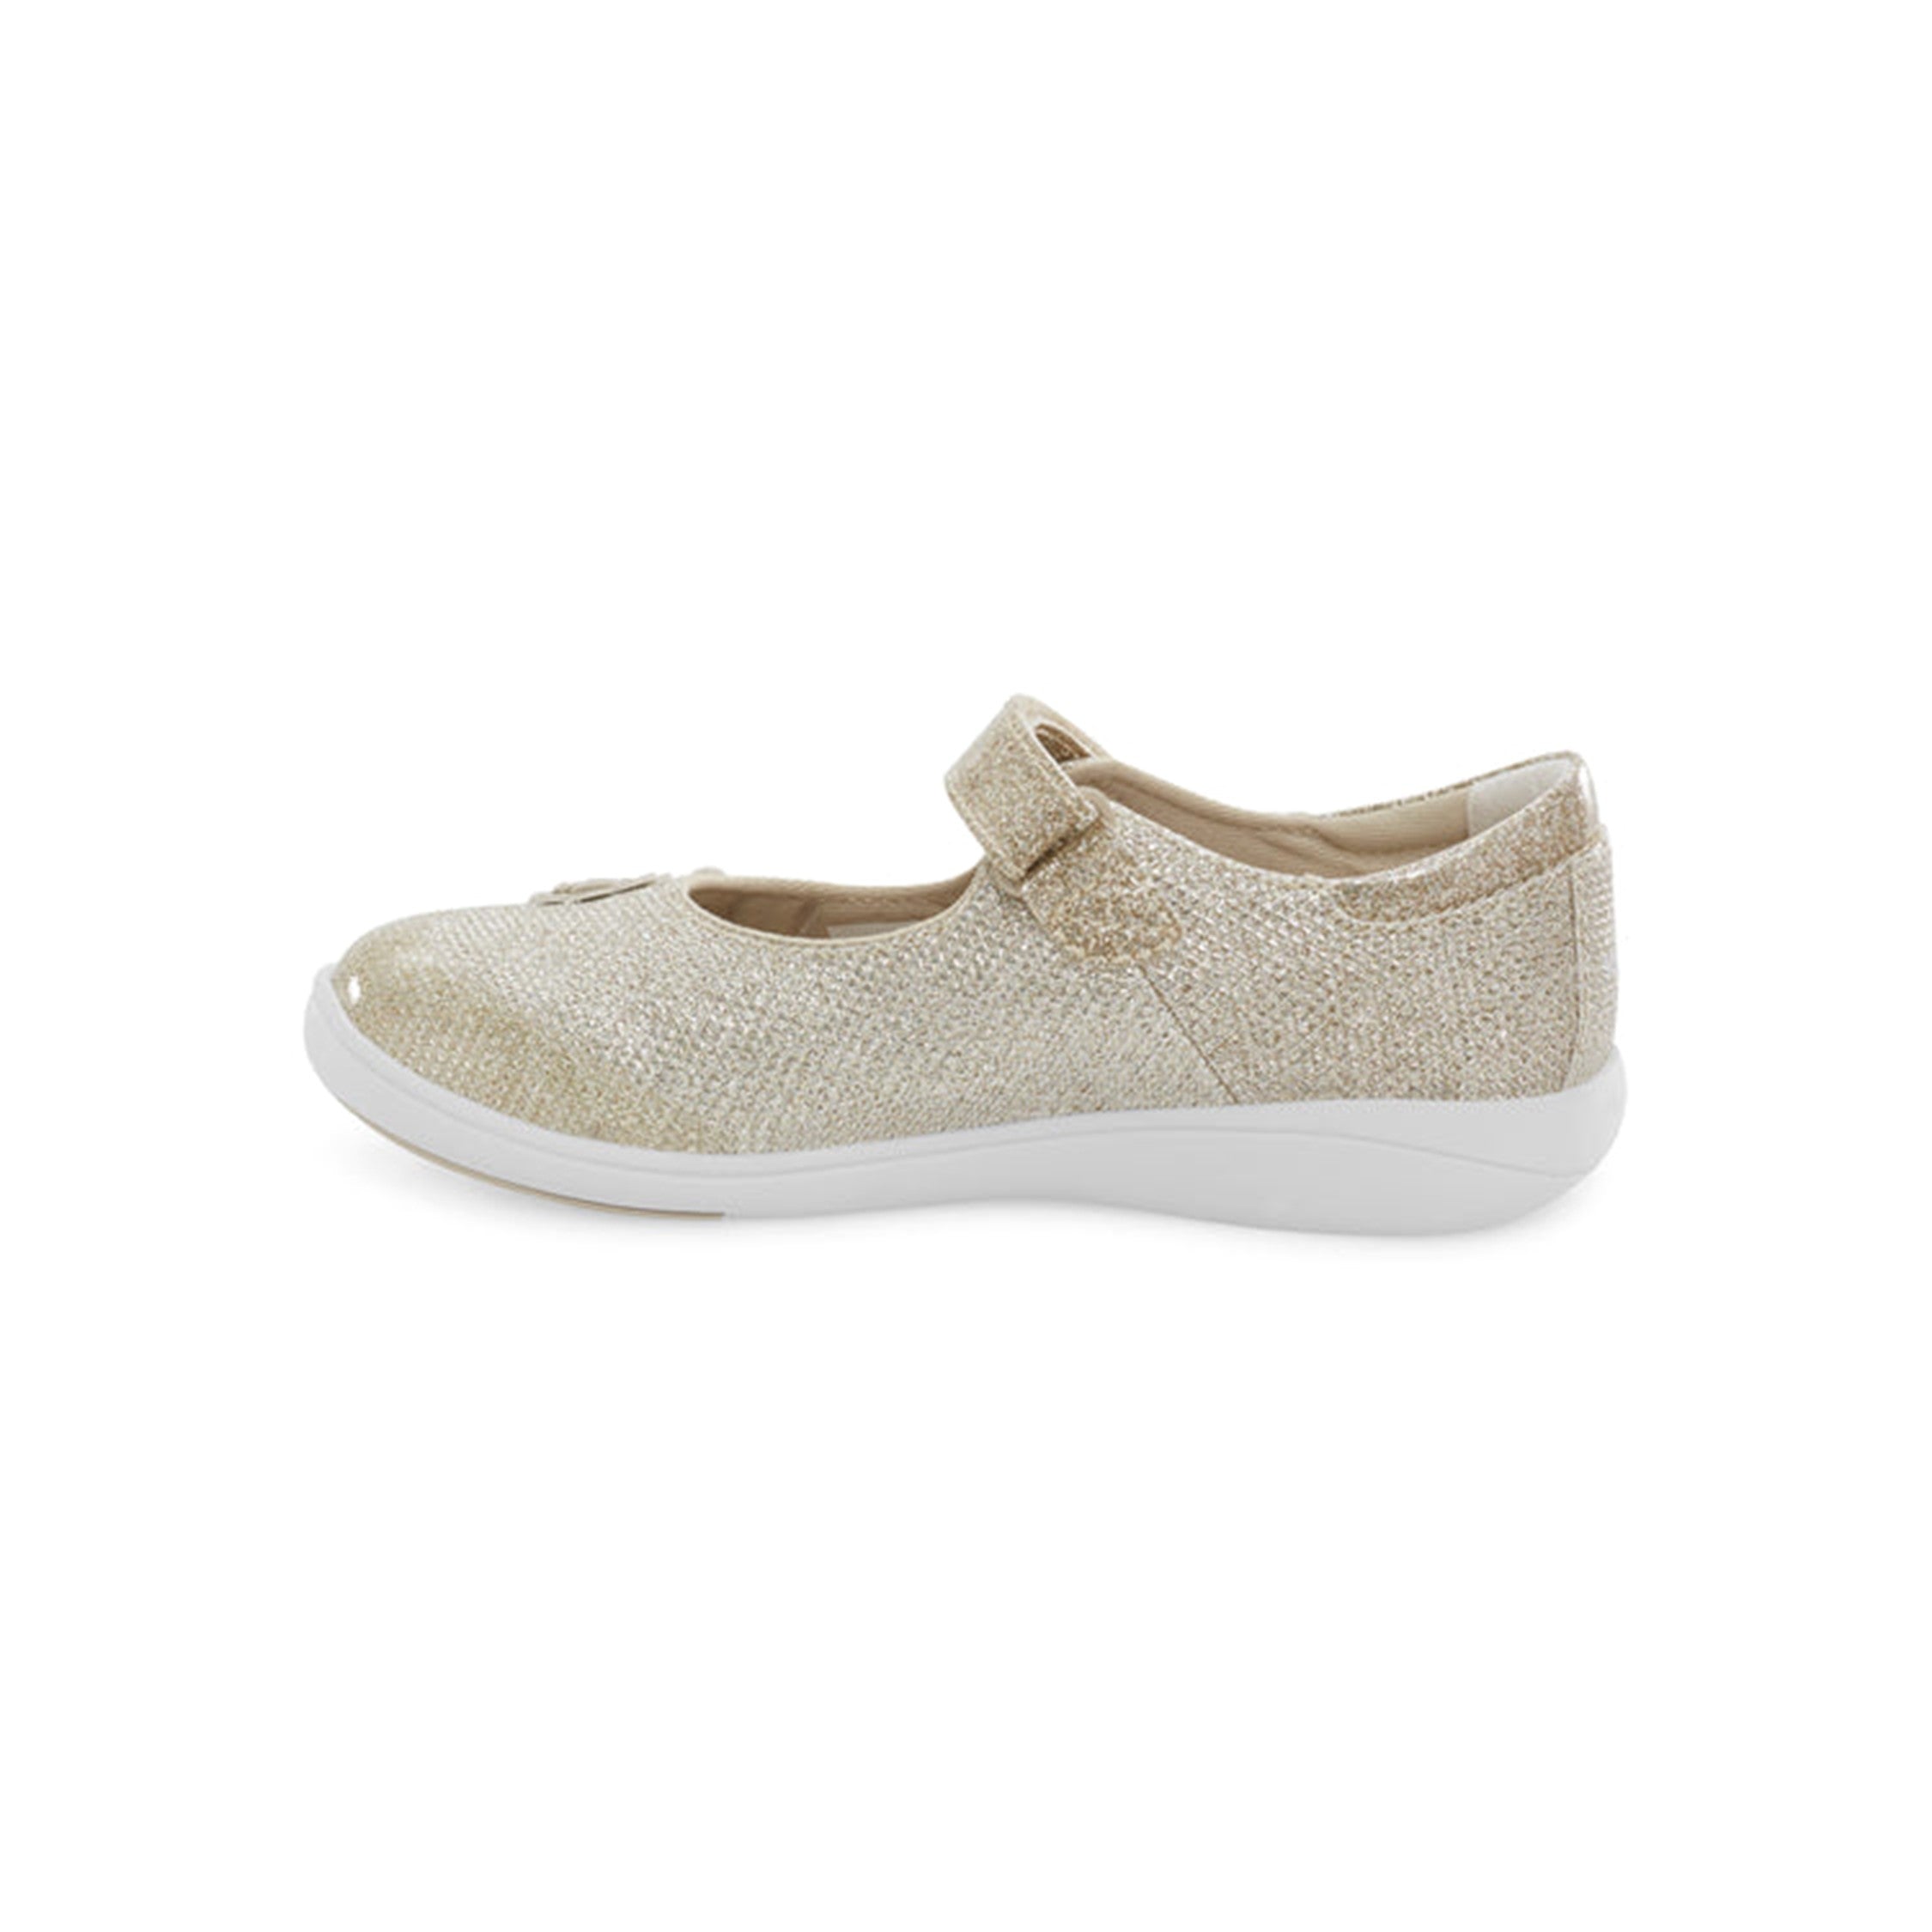 SR Holly Mary Jane Sparkle Sneaker - Champagne